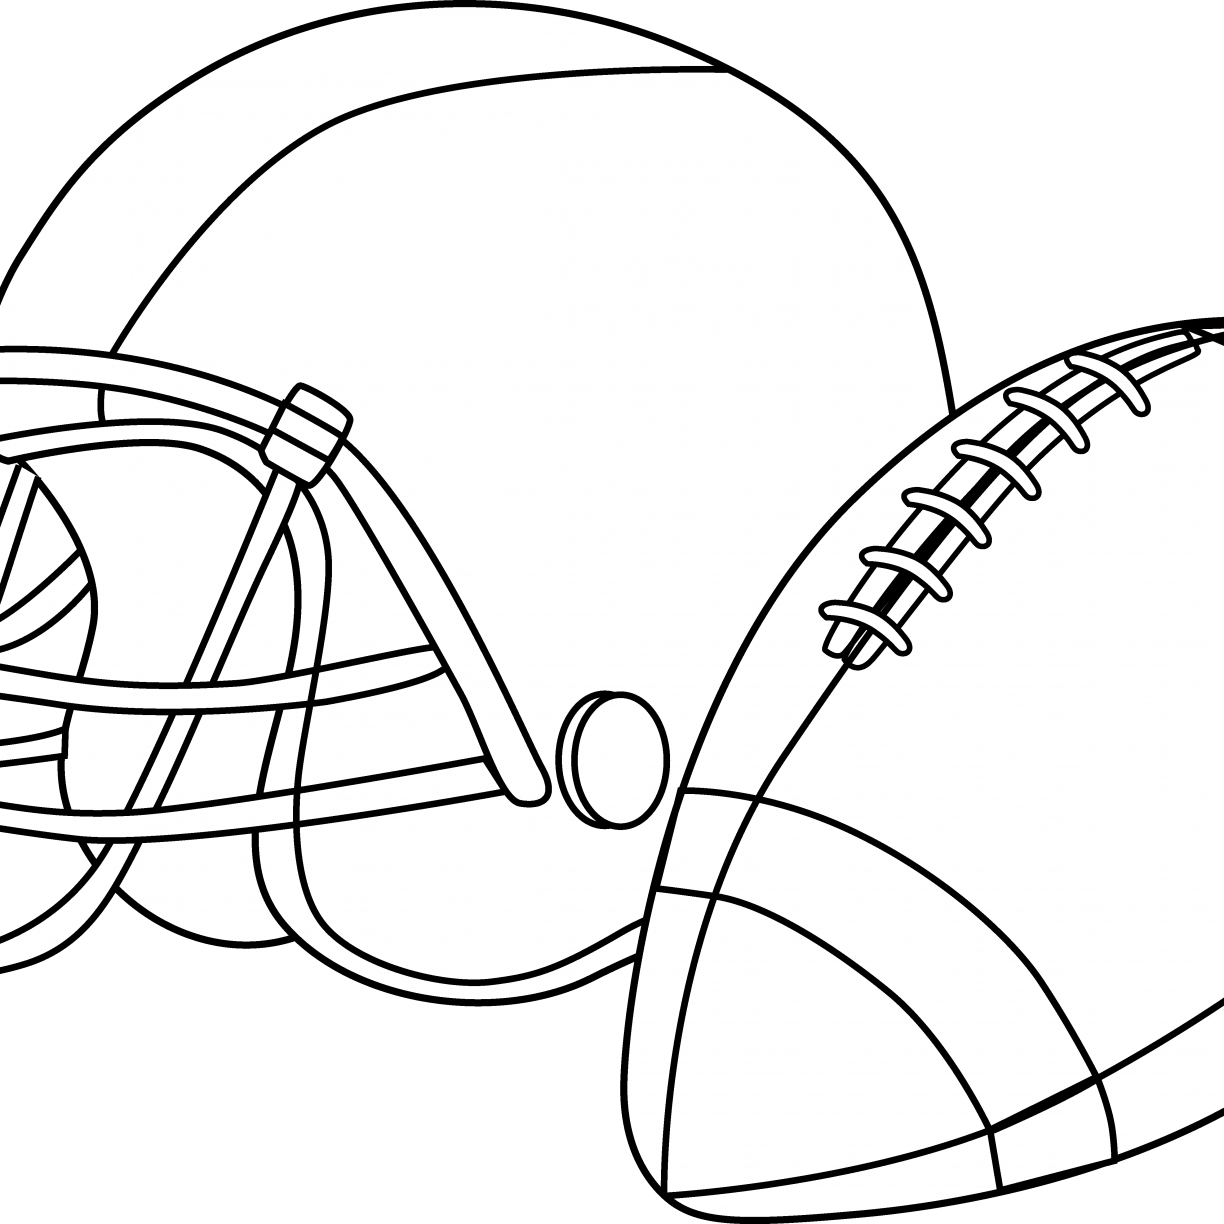 coloring book ~ 8454096 Football Helmetng Pages Preschool Denver Broncos  Free Download Football Ravens Sheets Printable 77 Staggering Football Coloring  Sheets. Football Coloring Sheets For Kids Printables. Free Football Coloring  Sheets For